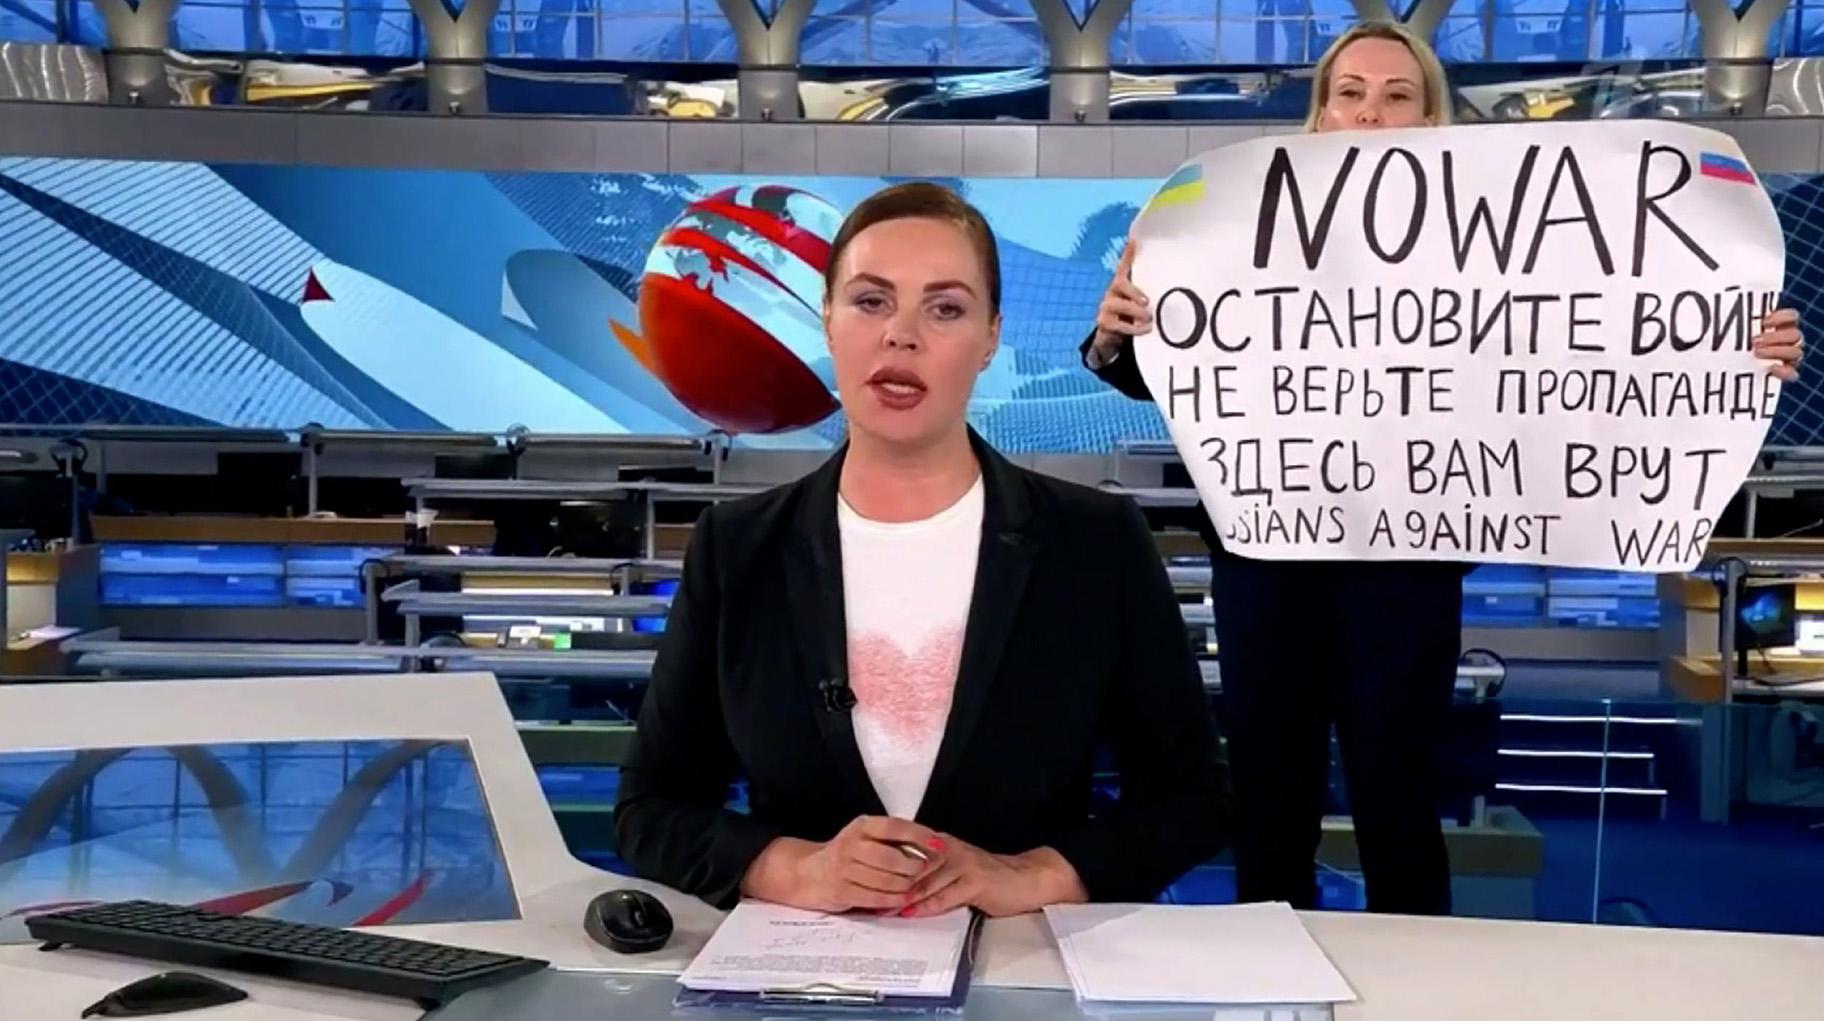 Marina Ovsyannikova protested the Russian war in Ukraine during a live news broadcast on Channel One March 14, 2022. (CNN) 